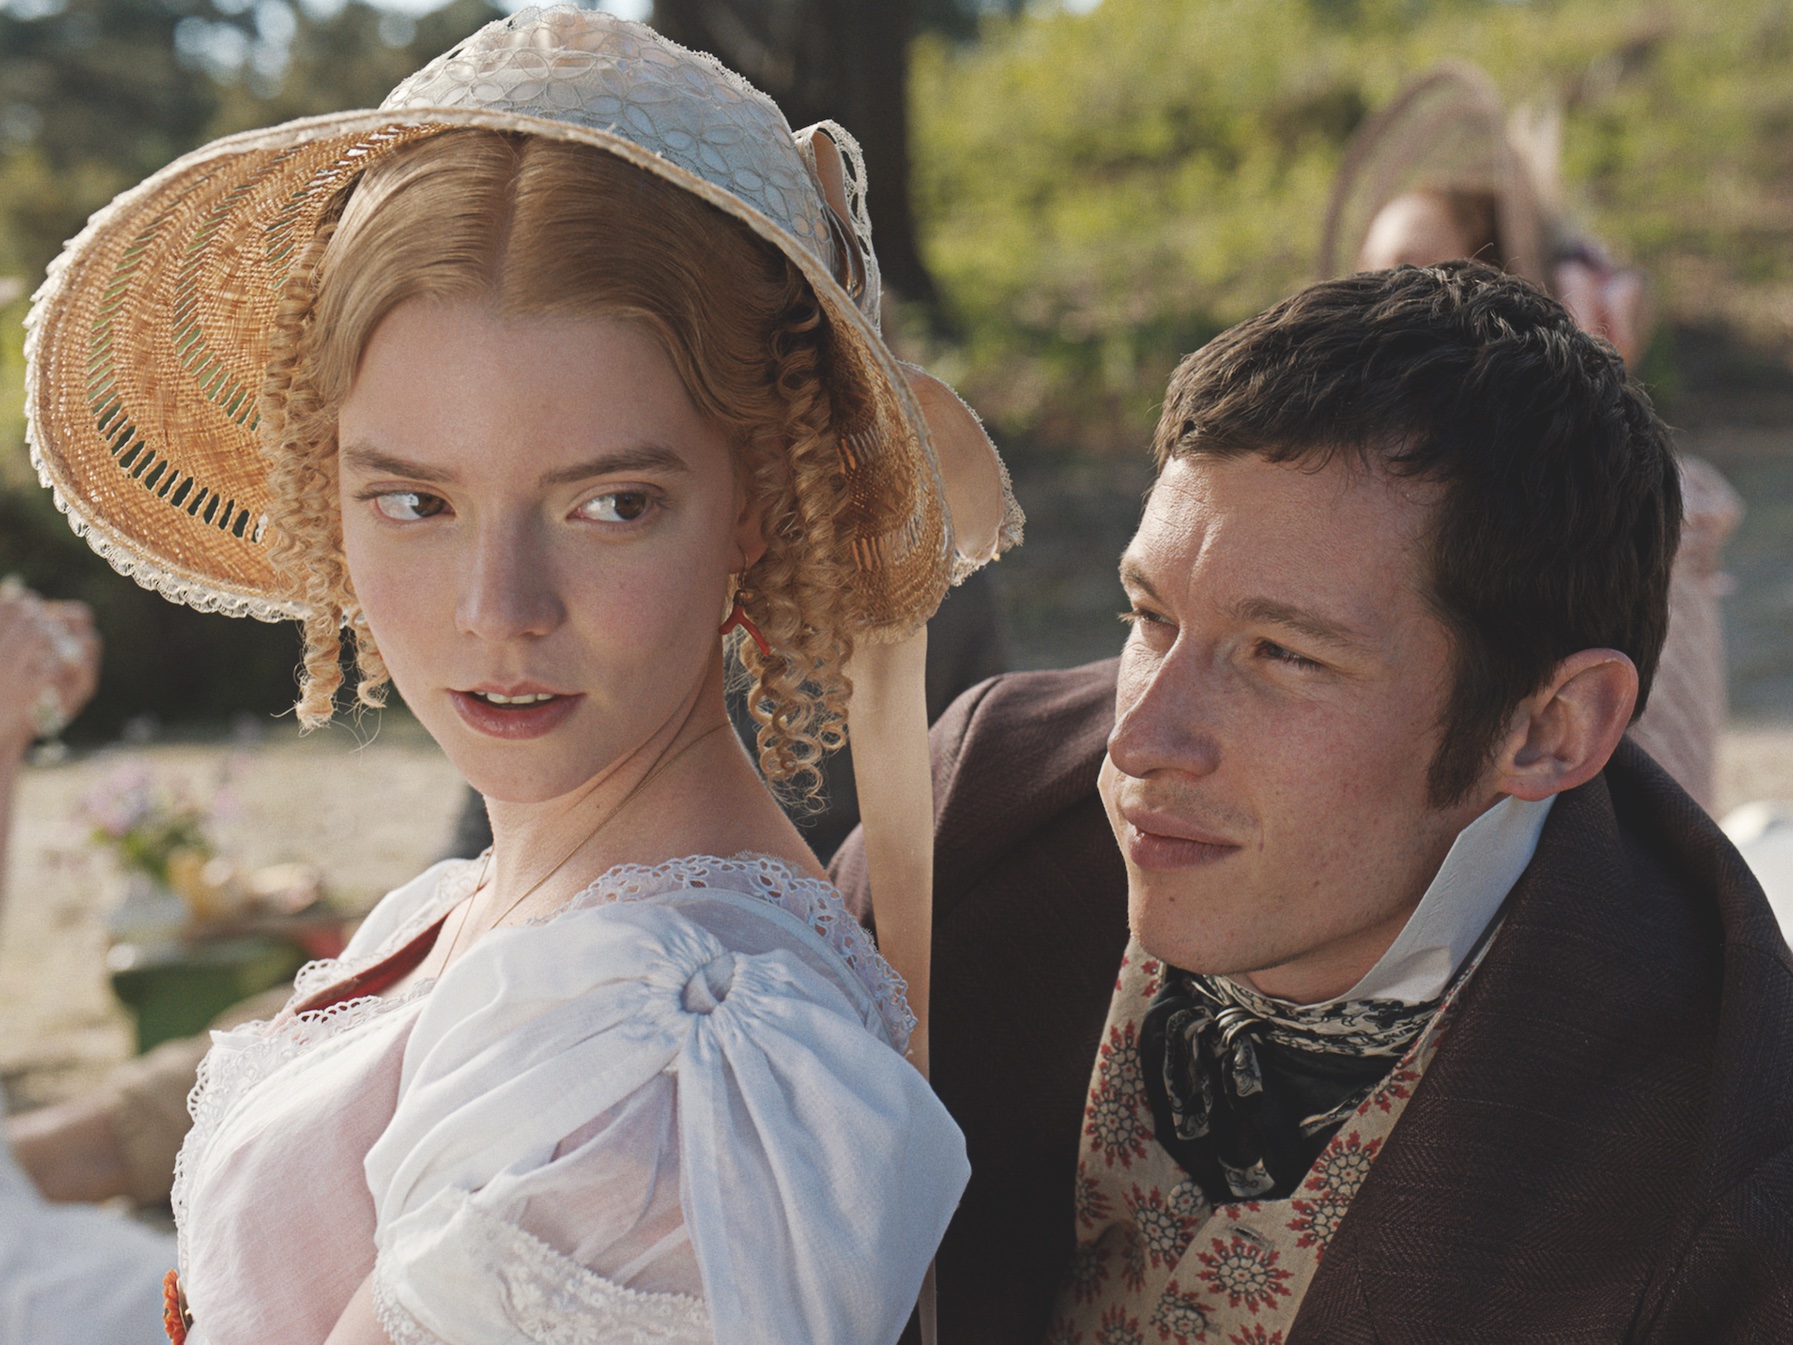 Jane Austen's 'Emma.' comes to the big screen again – The Tacoma Ledger